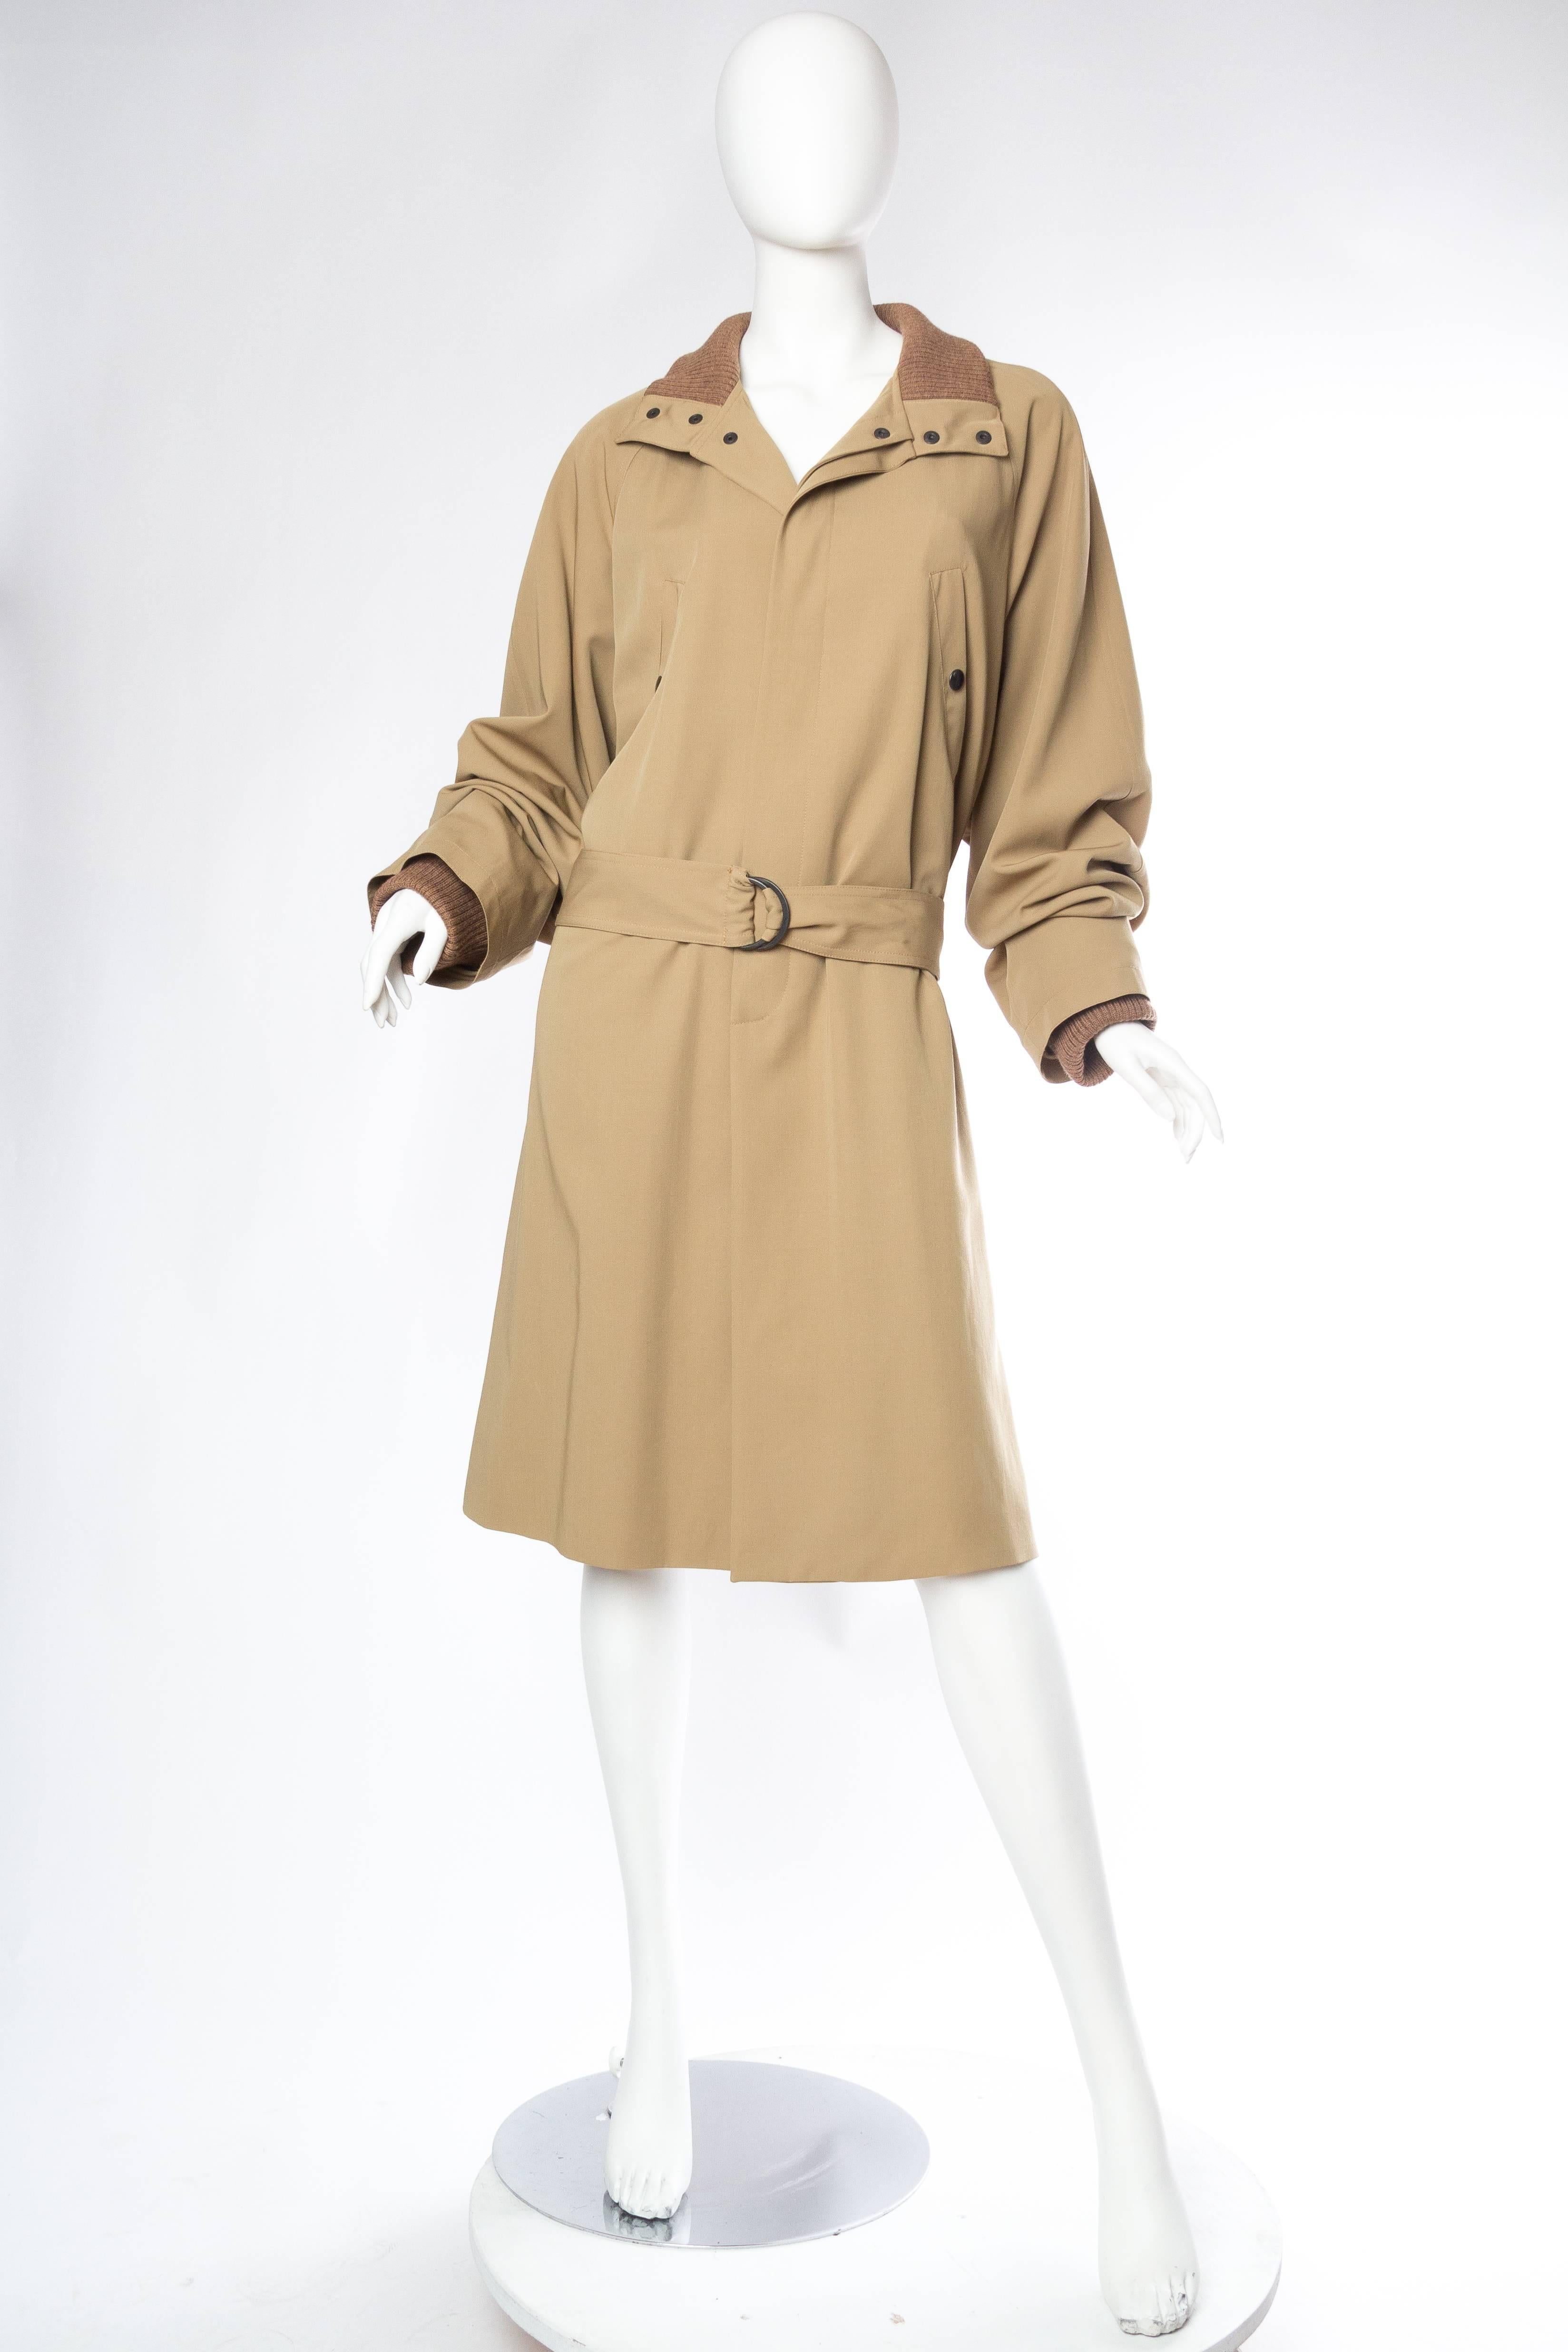 Meant for a He or a She Jean Paul Gaultier turned conventions on their head with his revolutionary yet short-lived unisex label. He cheekily refers to this literally in the design of the label itself. Cut full and chic in a fabric which has a